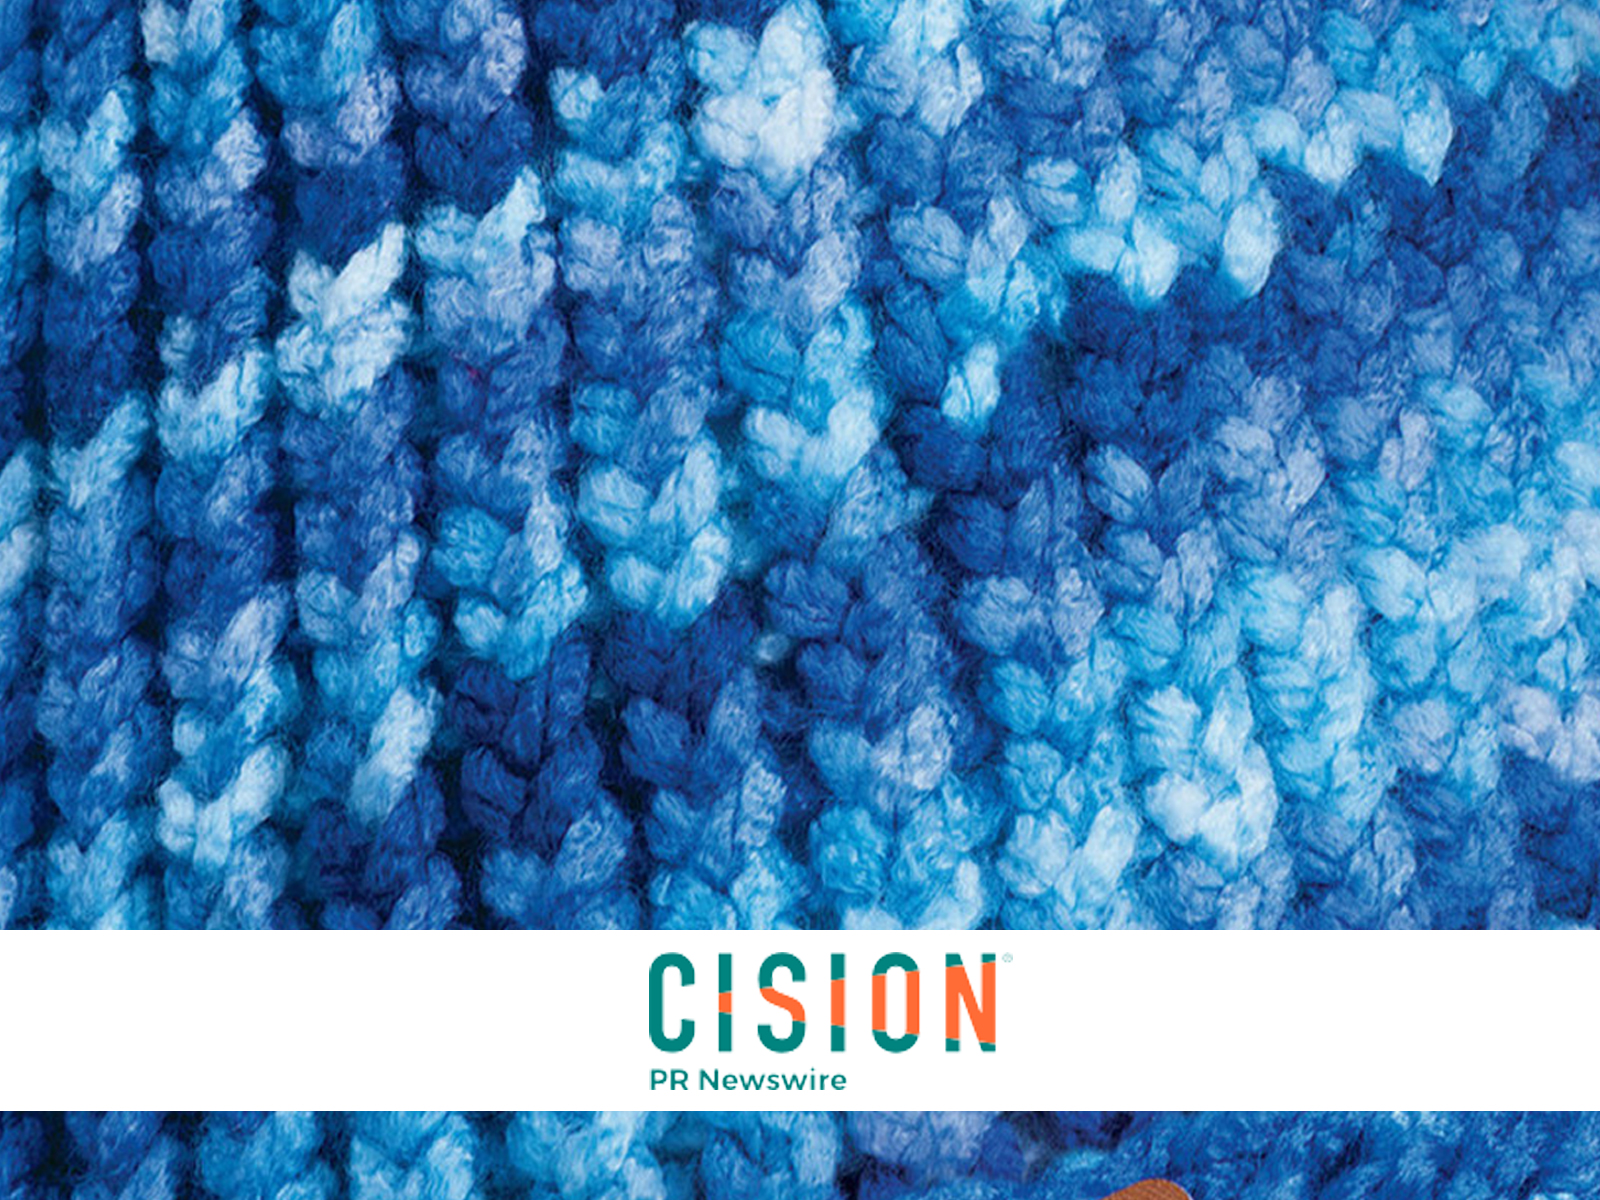 Cision pr newswire logo overlaid on image of woven blue yarn